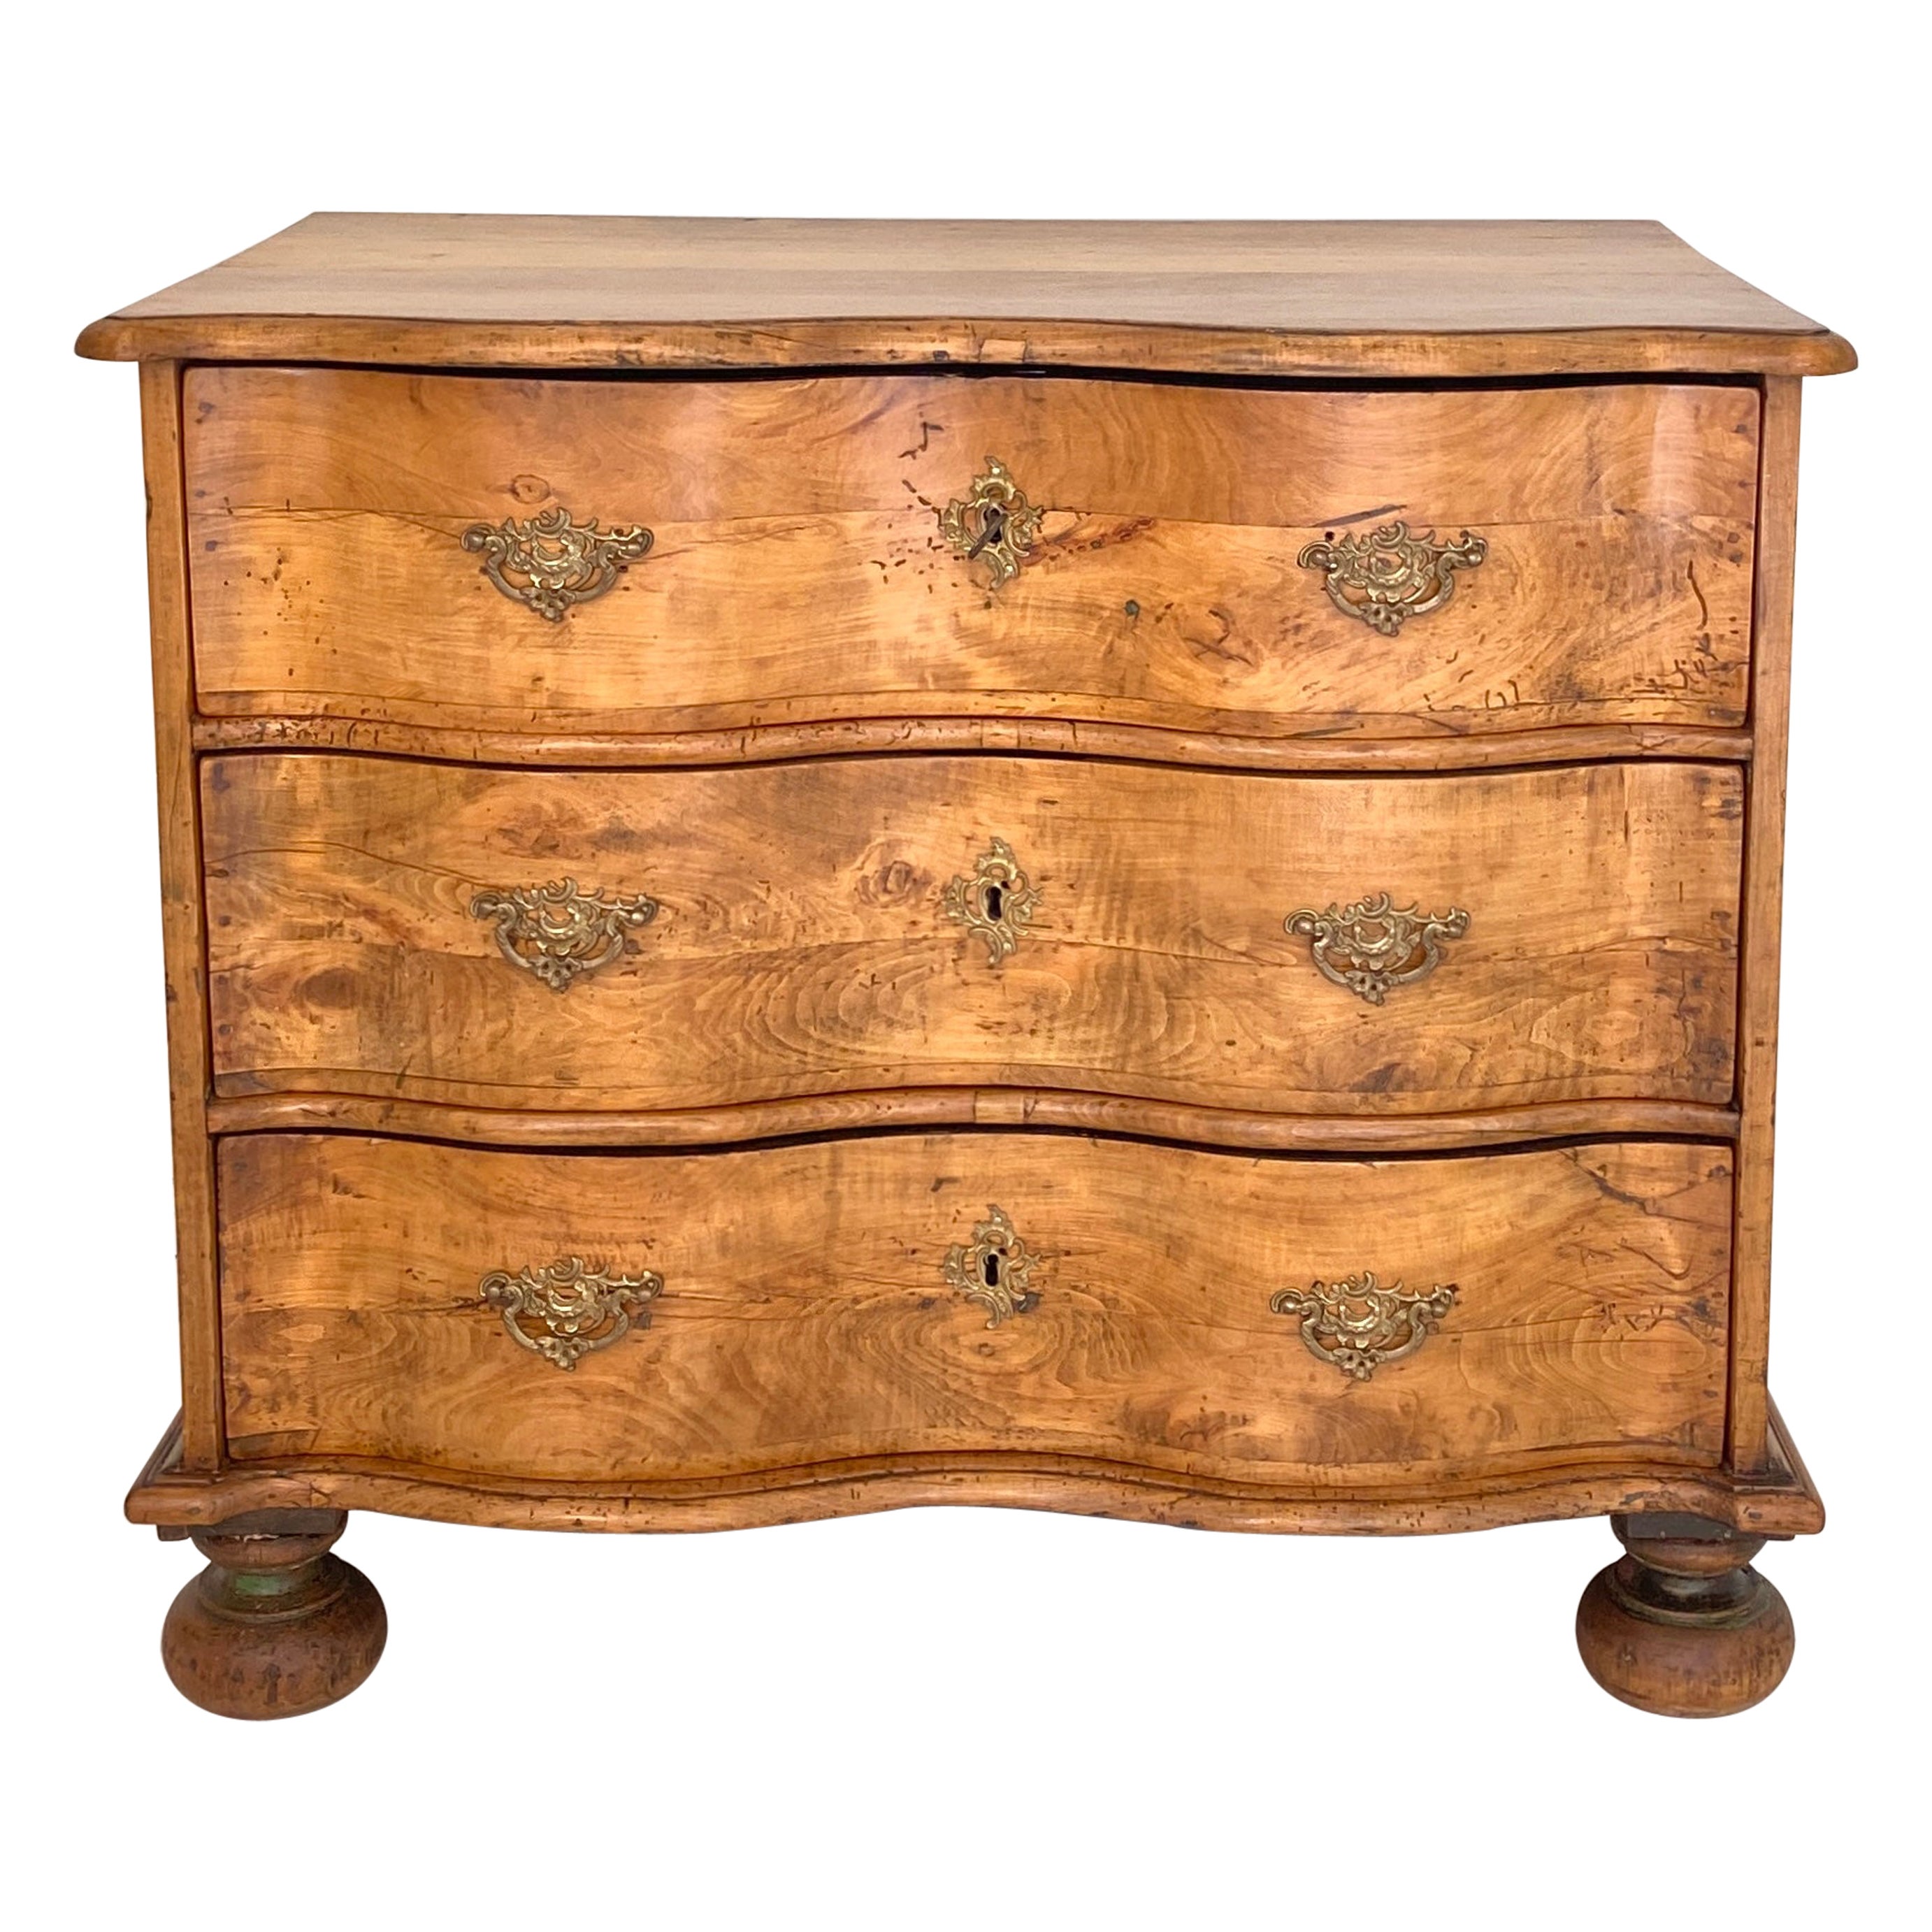 Early 18th Century German Baroque Commode in Cherrywood, around 1730